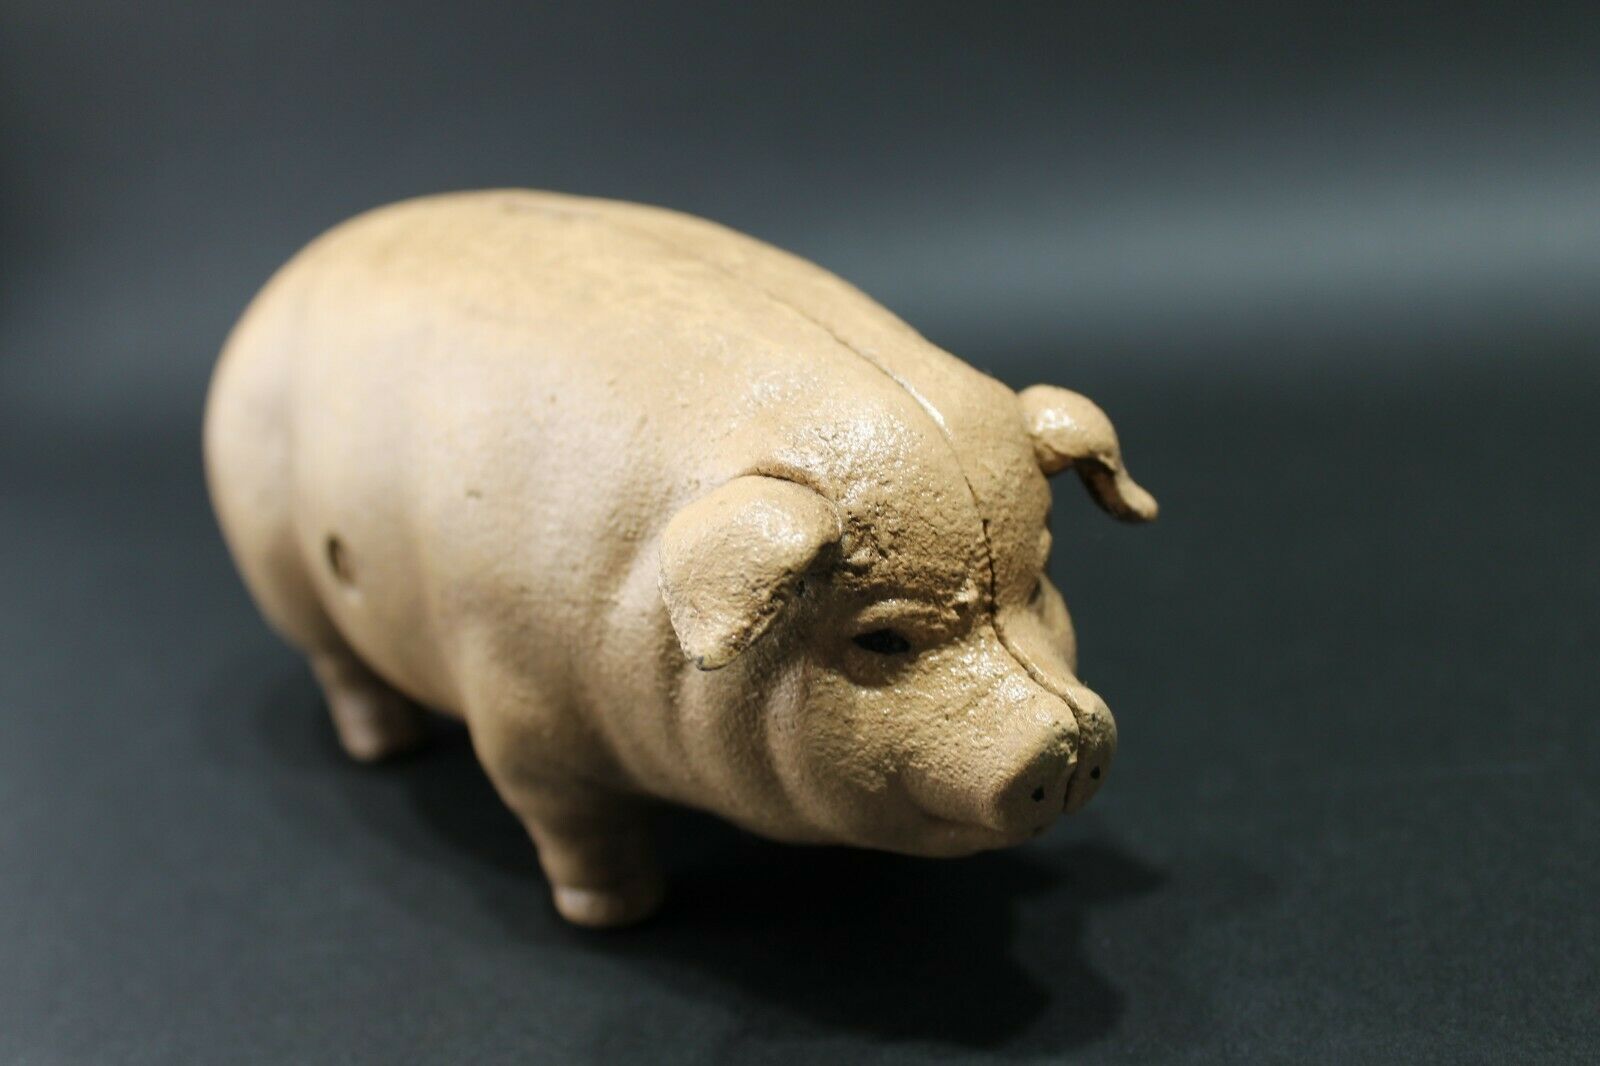 FINCK'S "OVERALLS" 'WEAR LIKE A PIG'S NOSE' 1885 Cast Iron Coin Bank - Early Home Decor